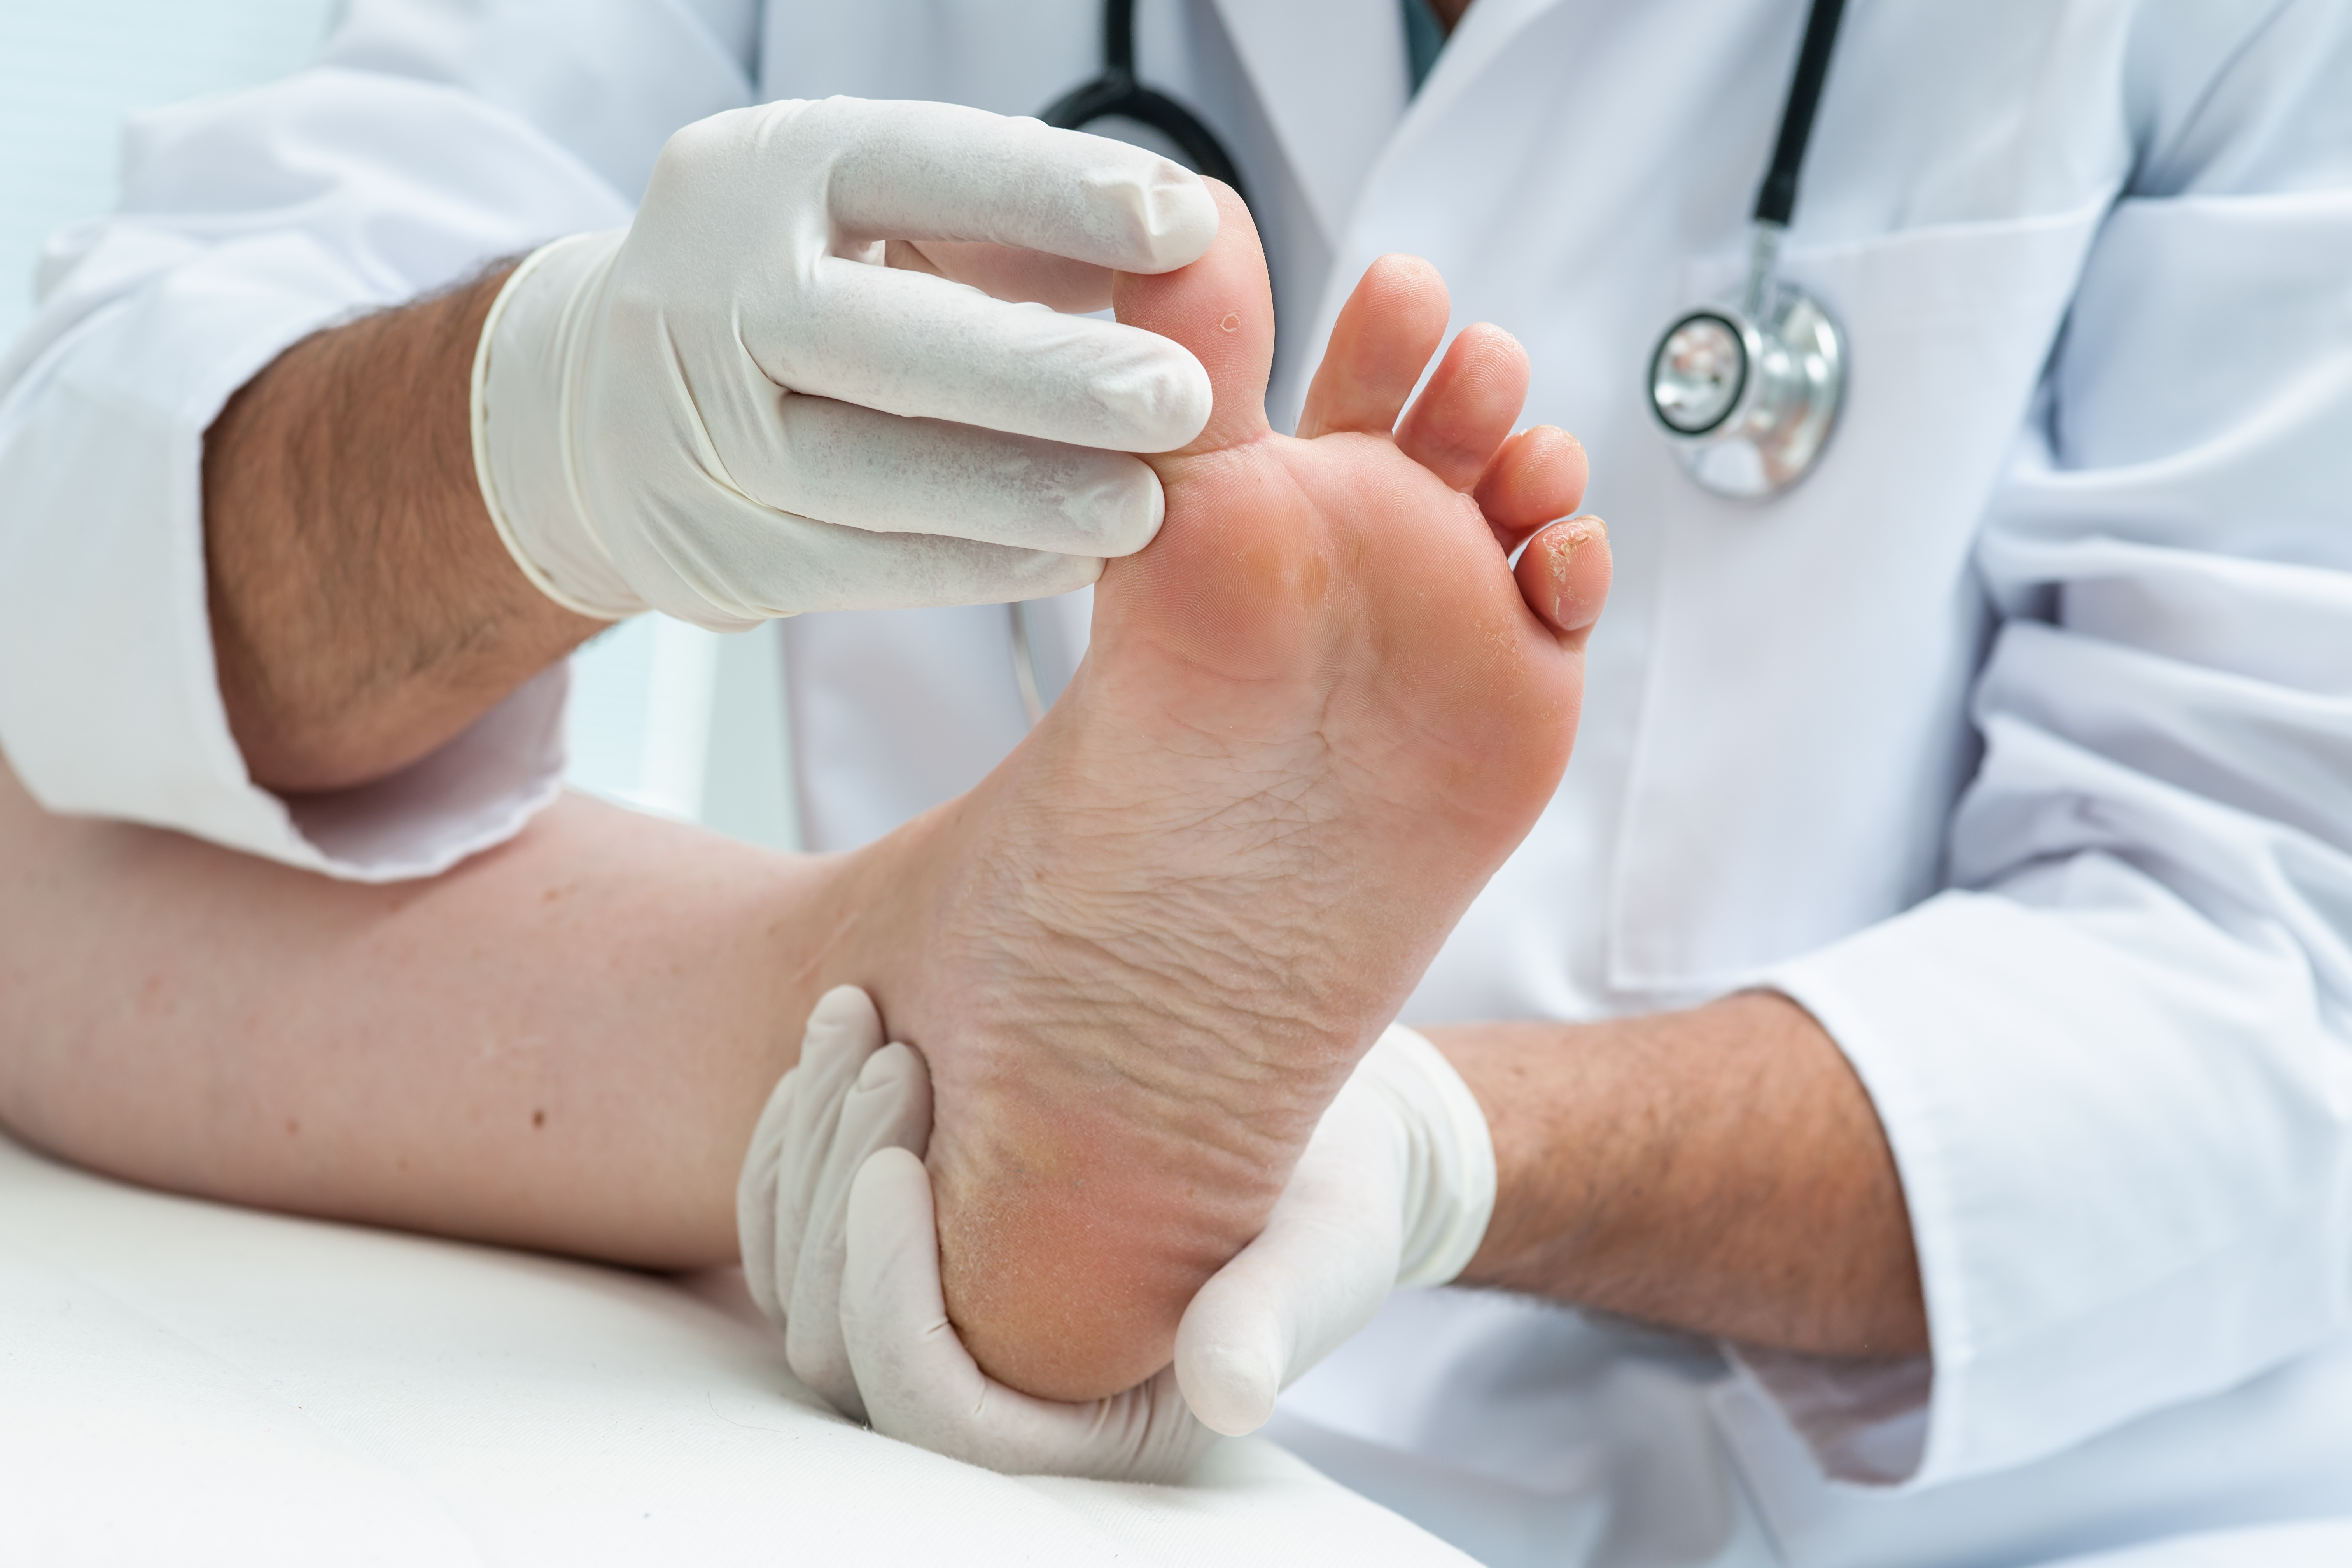 Image of foot being examined by a doctor wearing white exam gloves and a white lab coat.